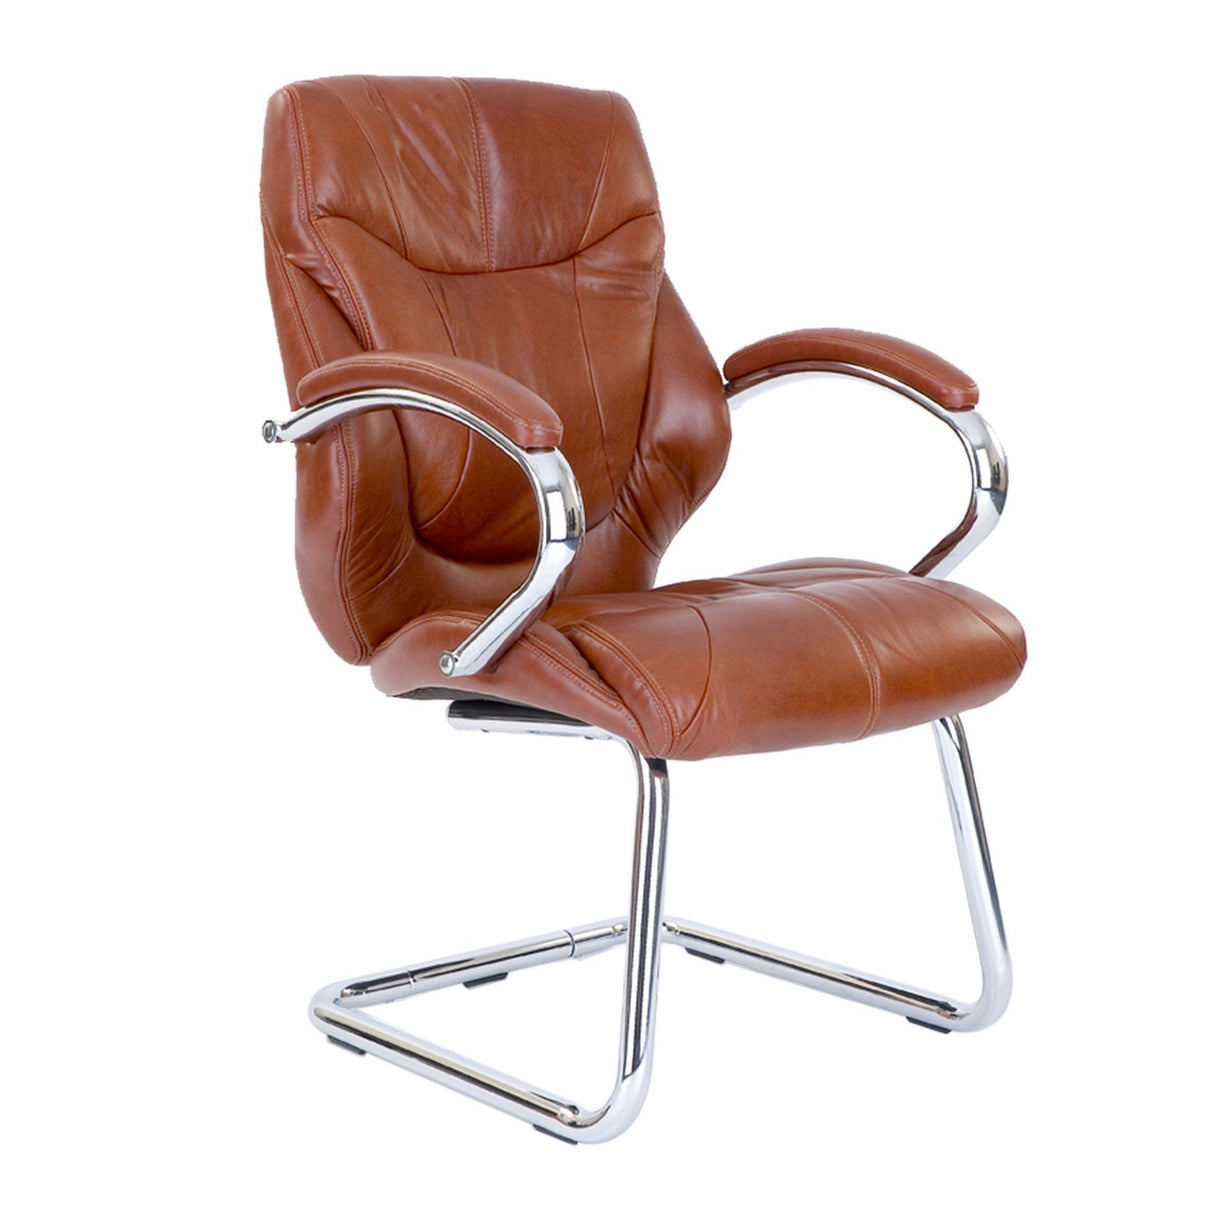 Nautilus Designs Sandown High Back Luxurious Leather Faced Executive Visitor Armchair with Integral headrest and Chrome Base - Tan